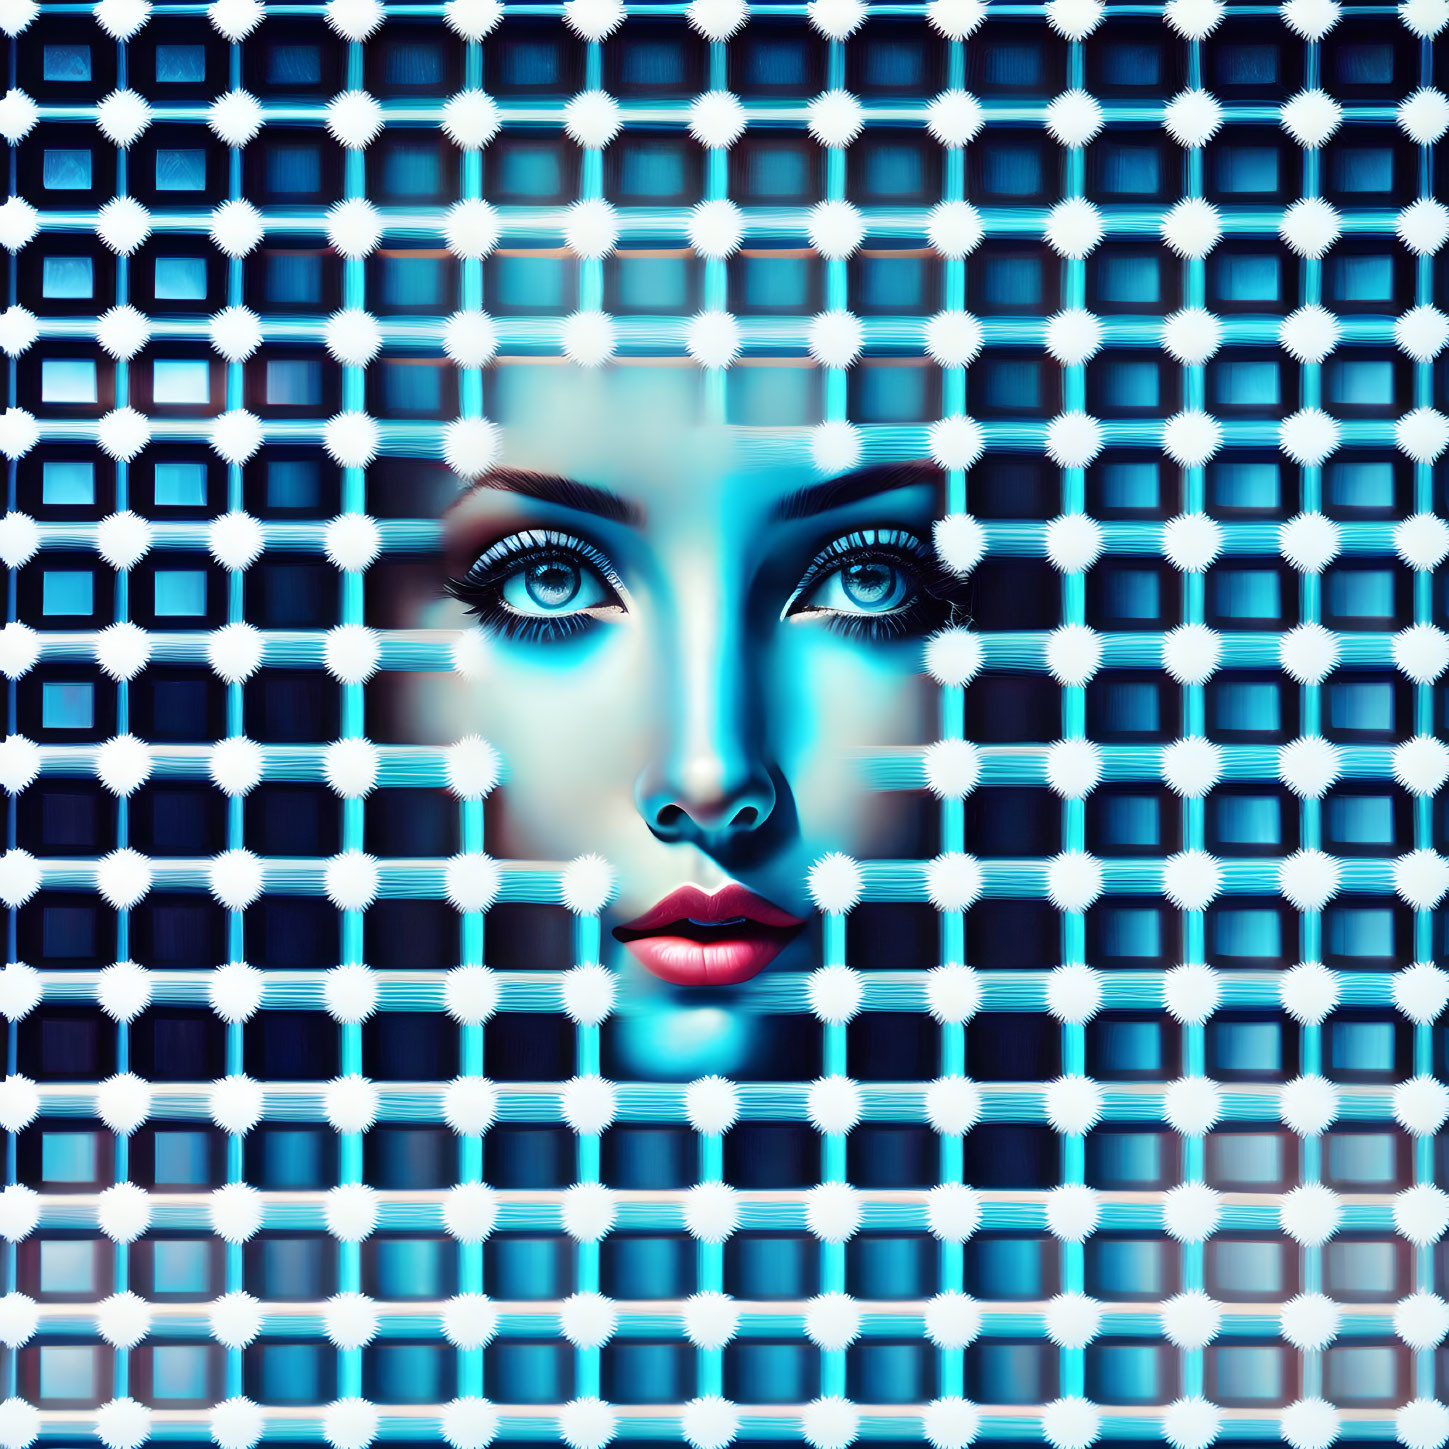 Digital art: Woman's face with glowing blue eyes merges with blue and white geometric pattern